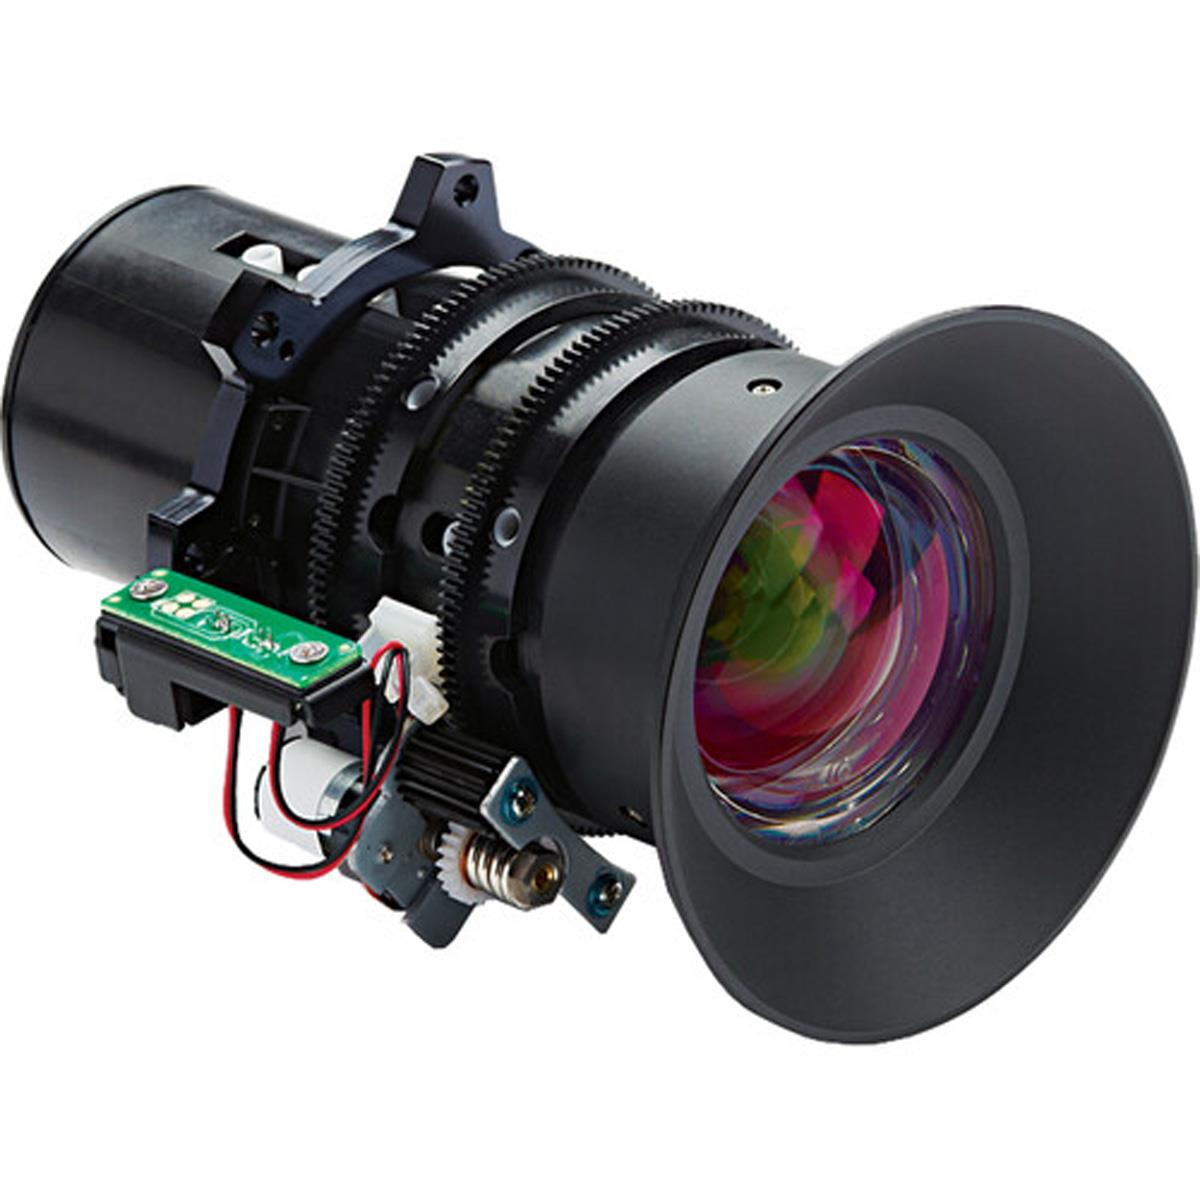 Image of Christie Digital 0.95 to 1.22:1 Zoom Lens for G/GS Series Projectors